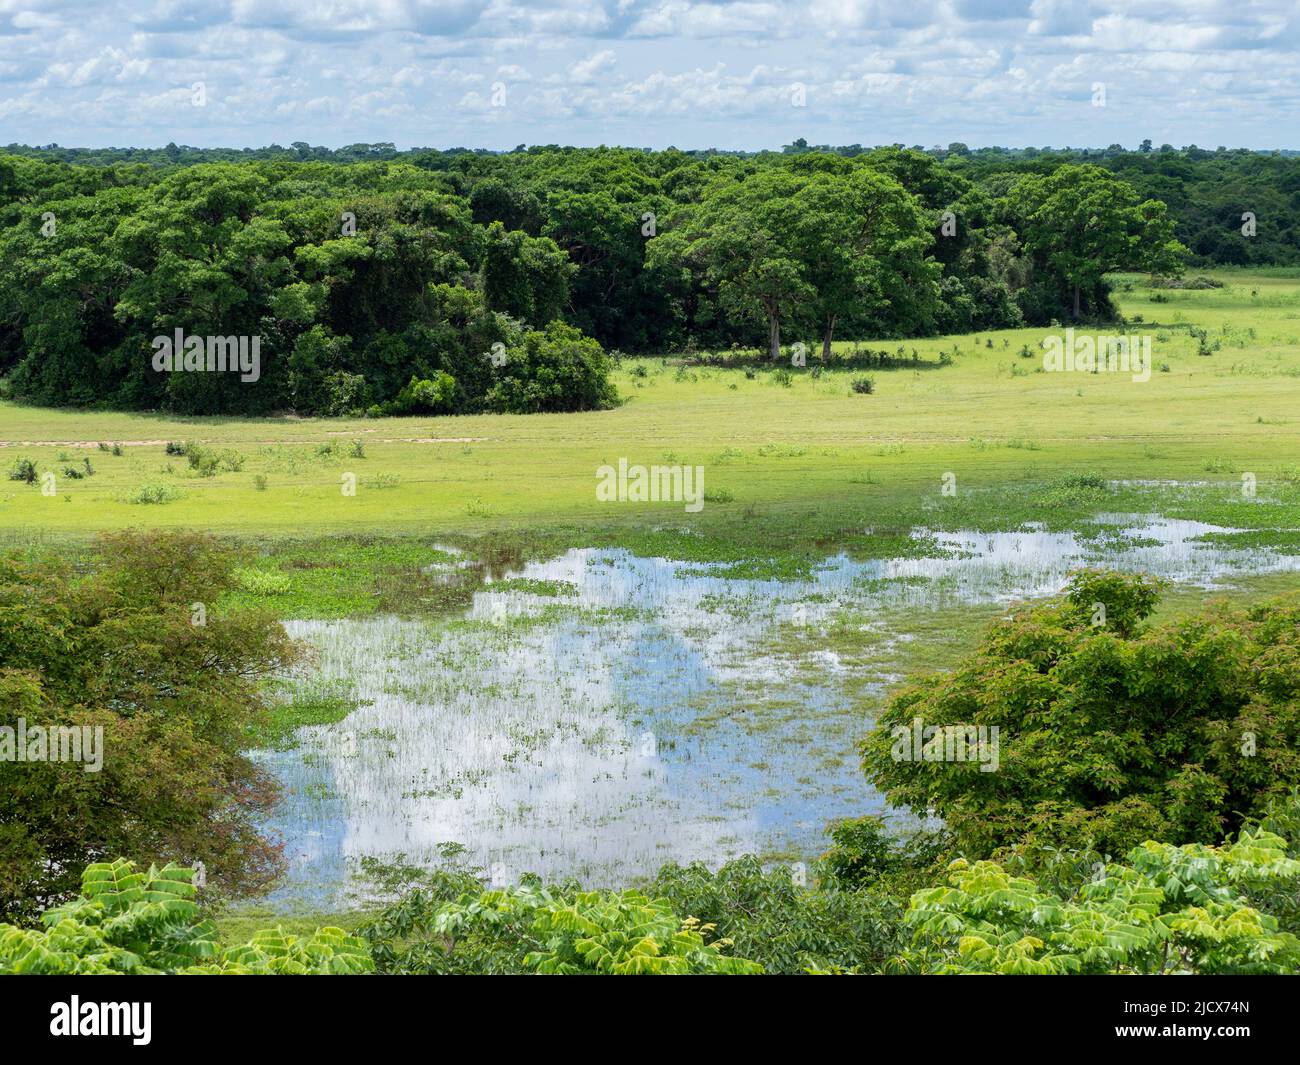 A view of the flooded land at Pousada Piuval, Mato Grosso, Pantanal, Brazil, South America Stock Photo